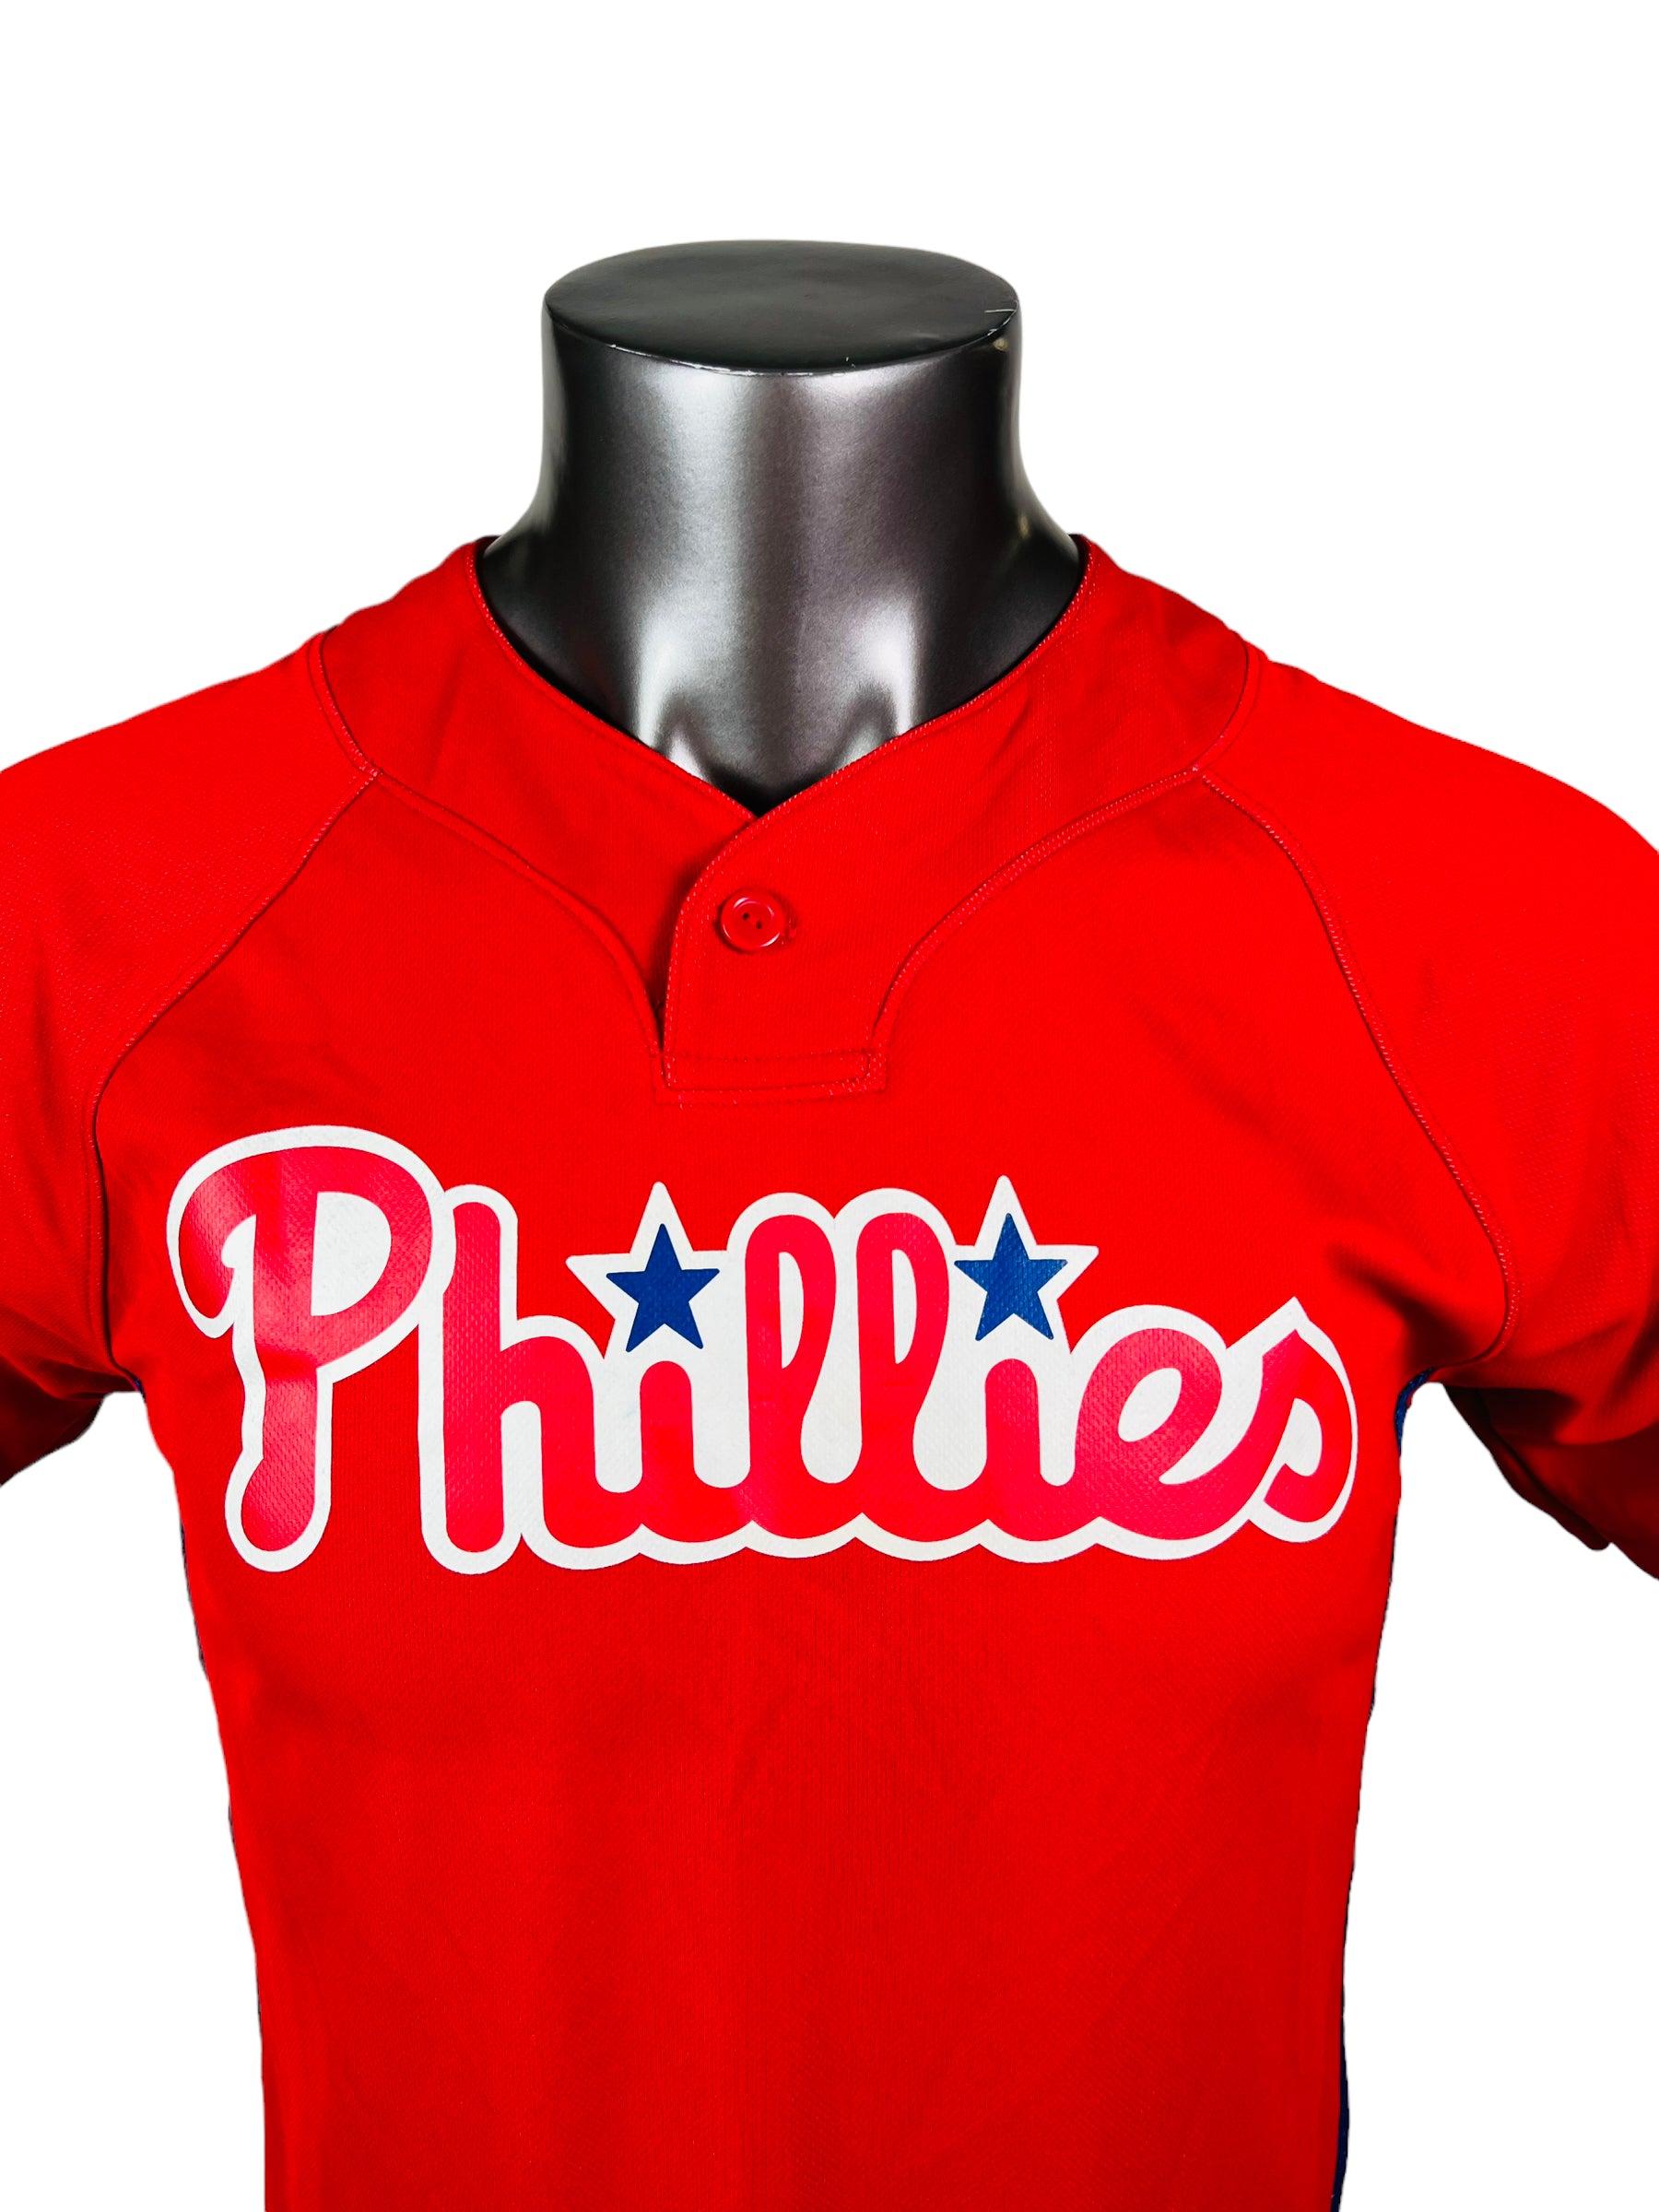 ryan howard jersey phillies red blue xl majestic